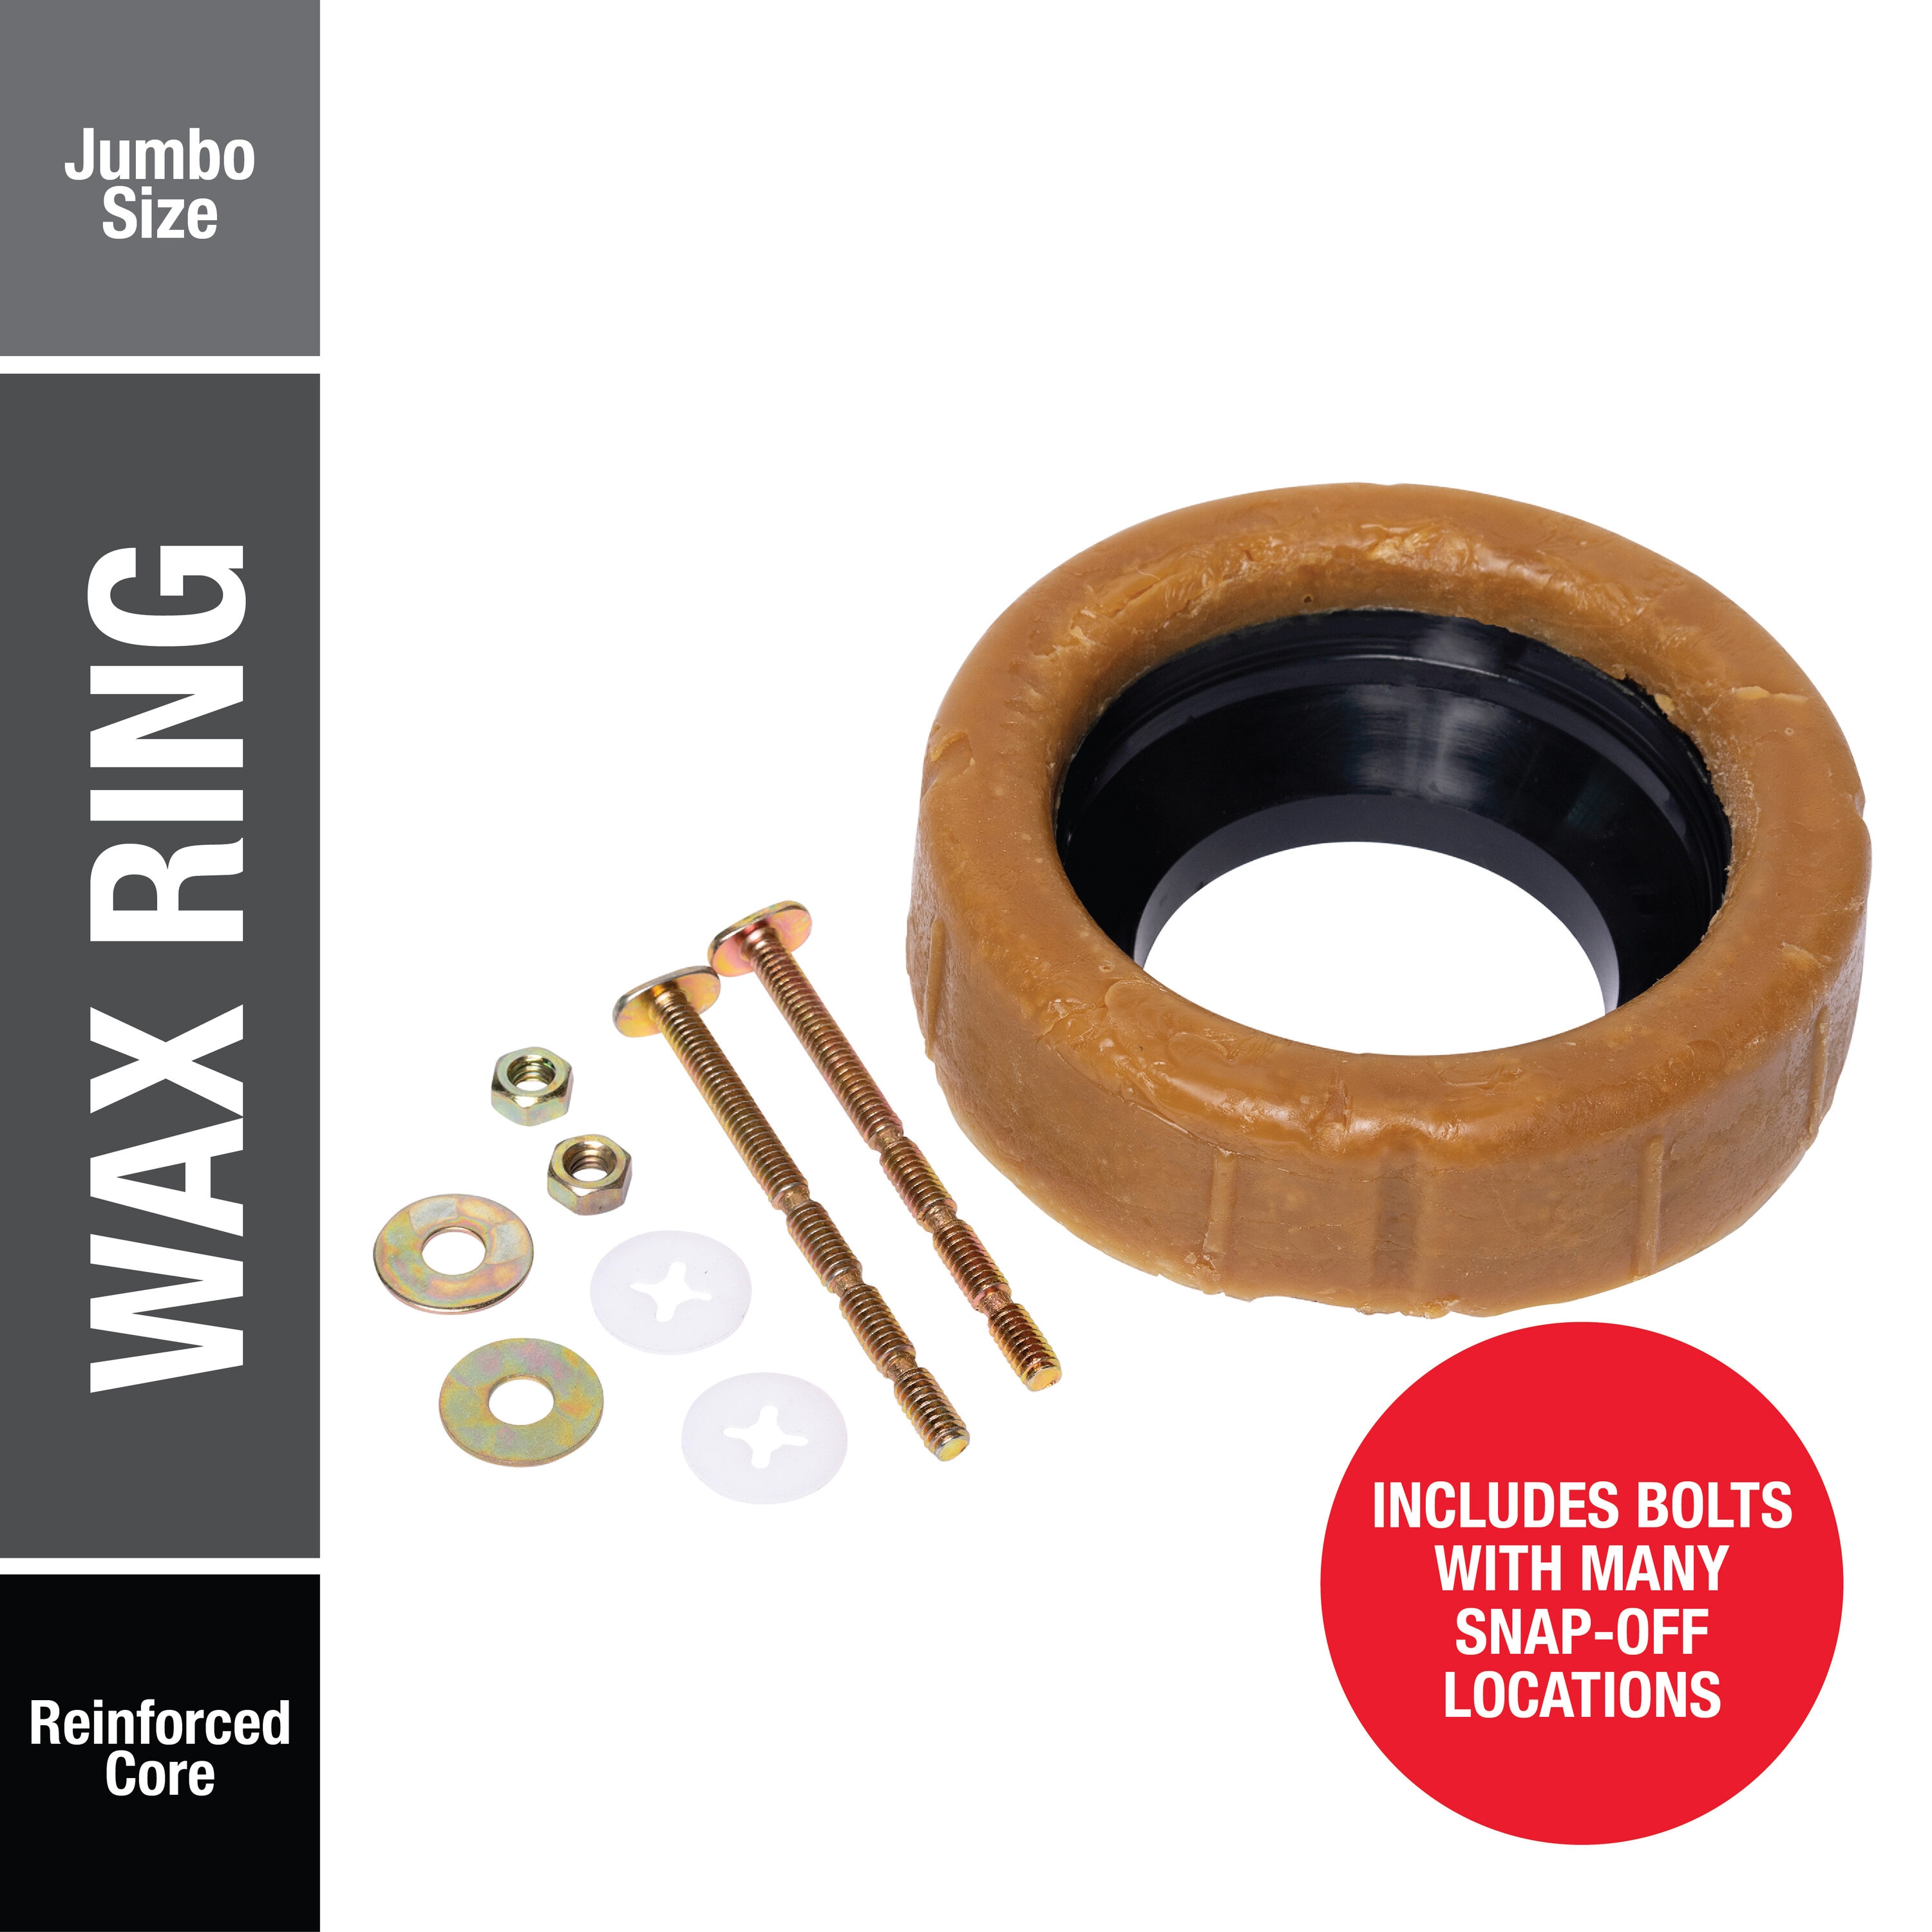 boeemi Wax Ring Toilet Kit,Includes Flanges and Bolts for reinstalling The  Toilet,Fits 3-inch or 4-inch Waste Lines(2 PCS).